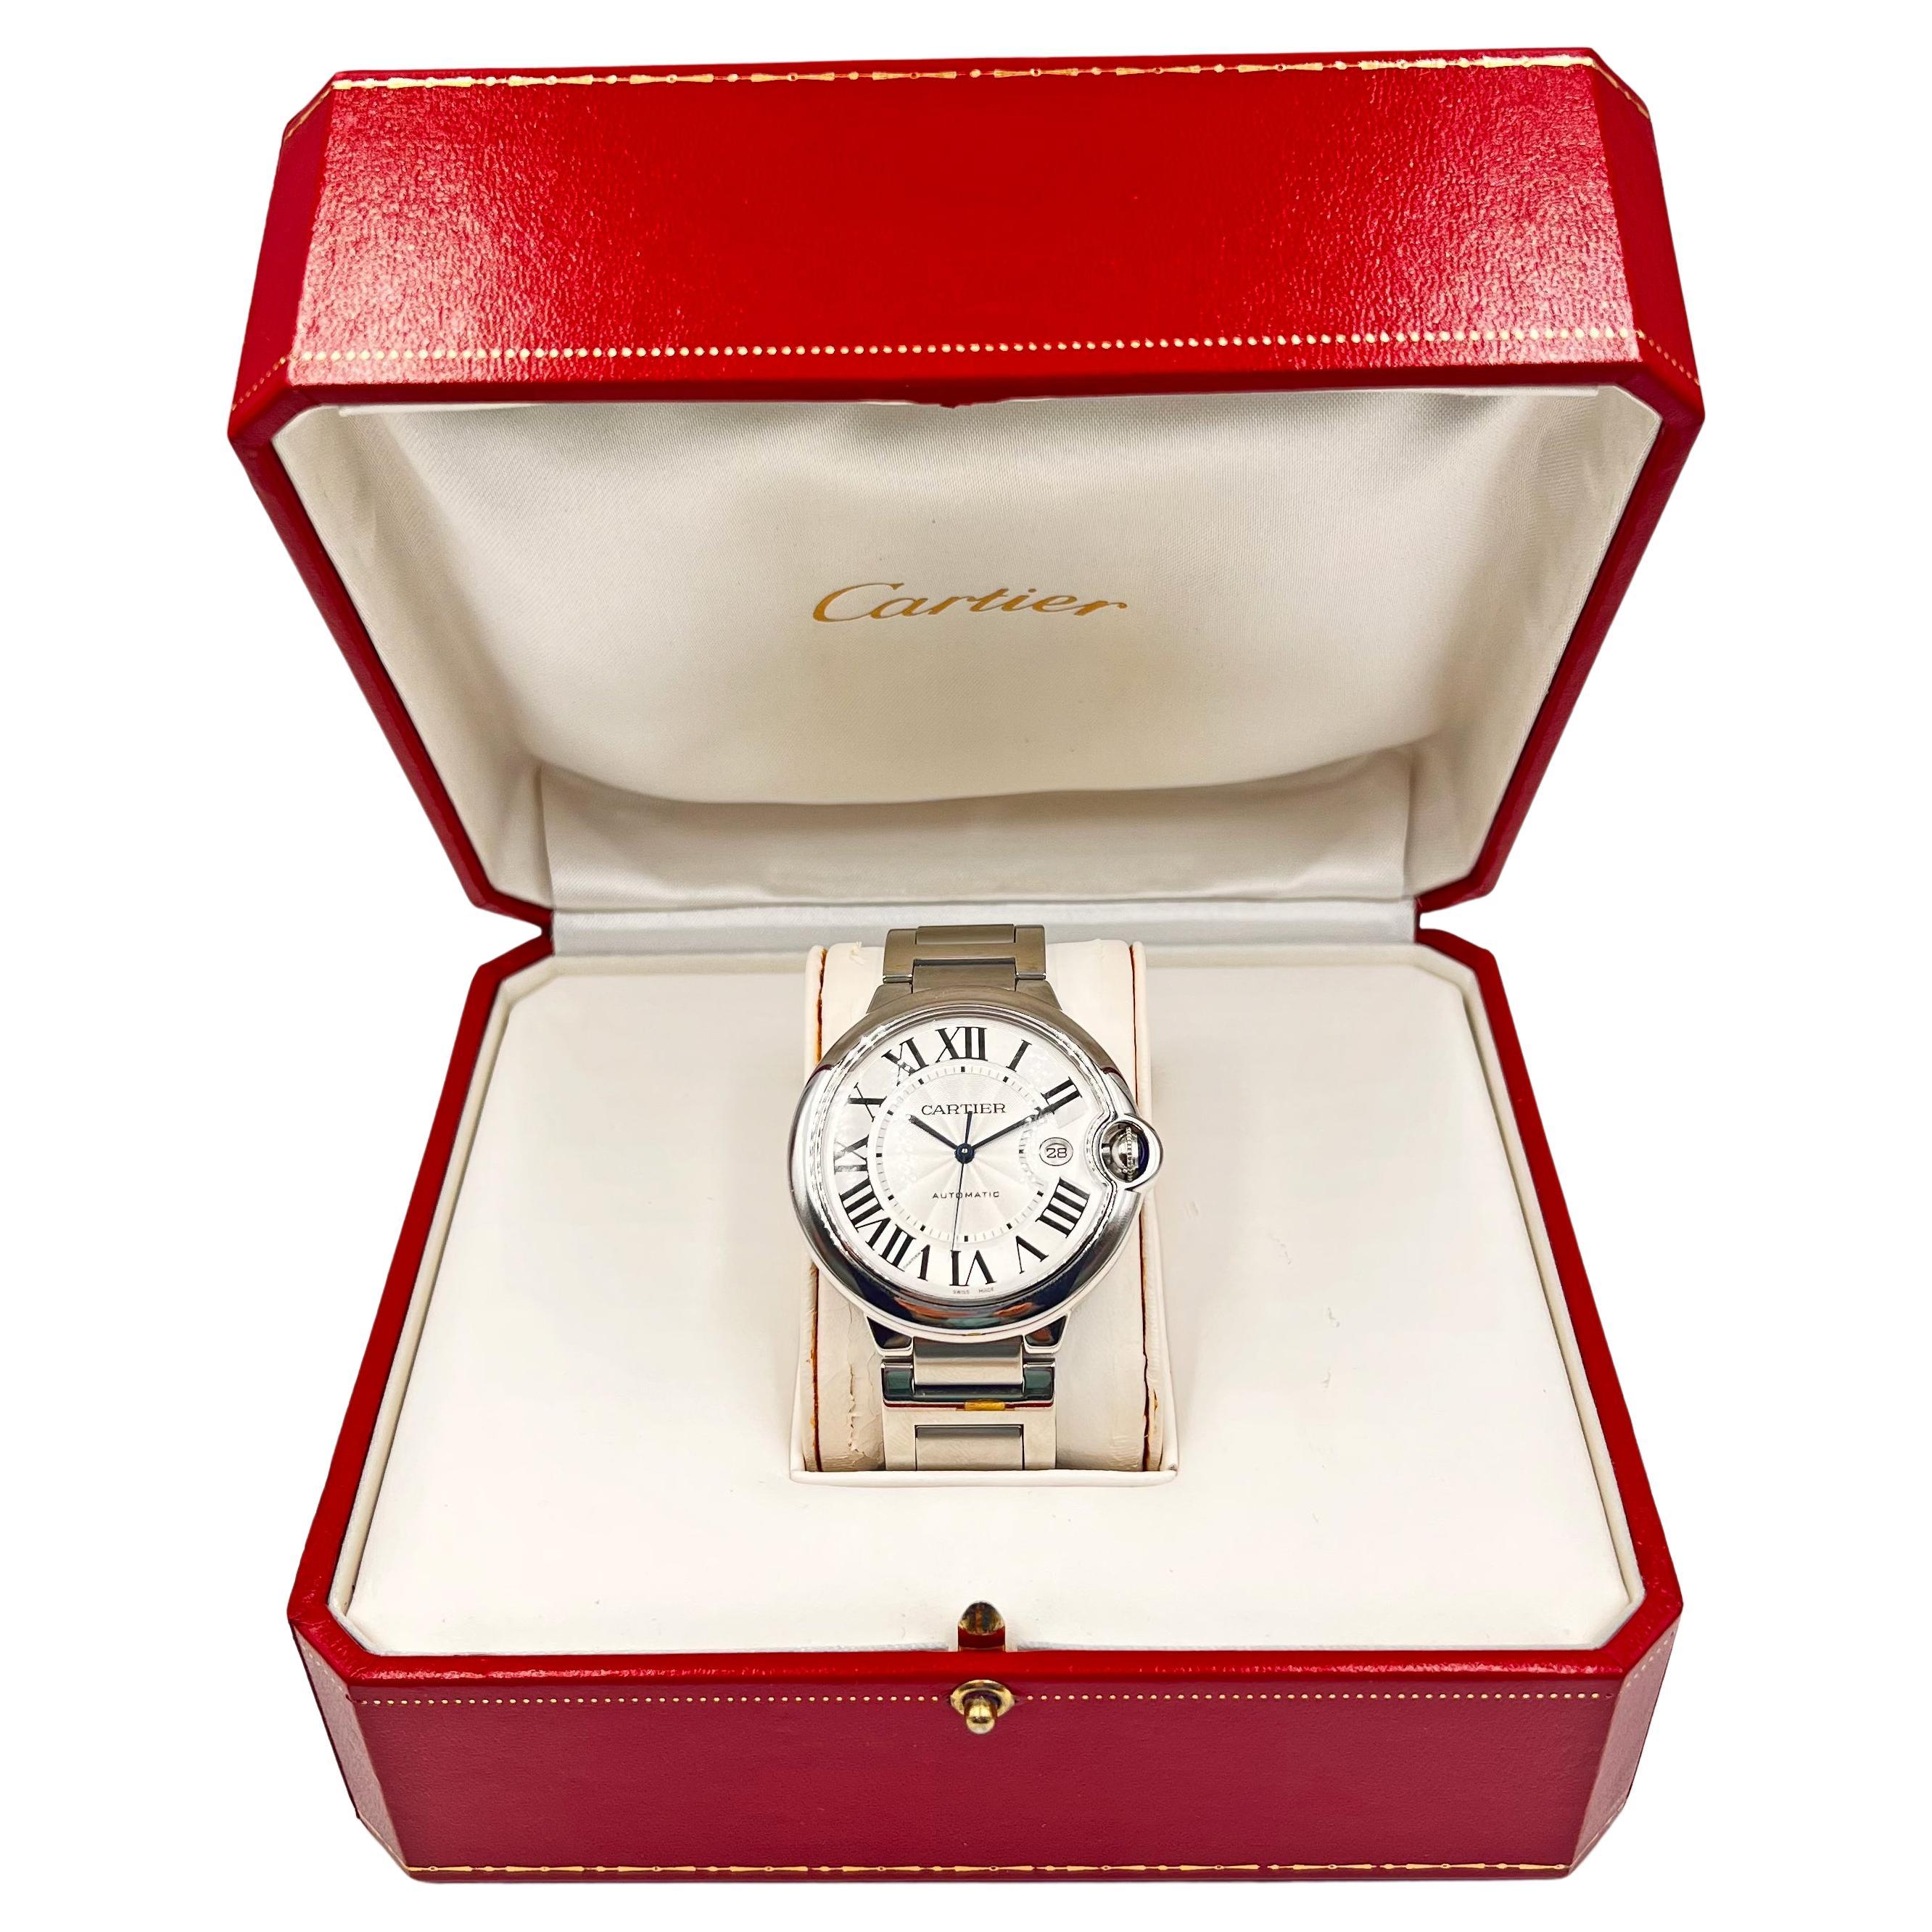 Pre-owned Cartier Ballon Bleu wristwatch (ref. W69012Z4), featuring a self-winding automatic movement; silvered opaline flinqué dial with black Roman numerals & blued-steel, sword-shaped hands; date display at 3 o'clock; center seconds hand; and